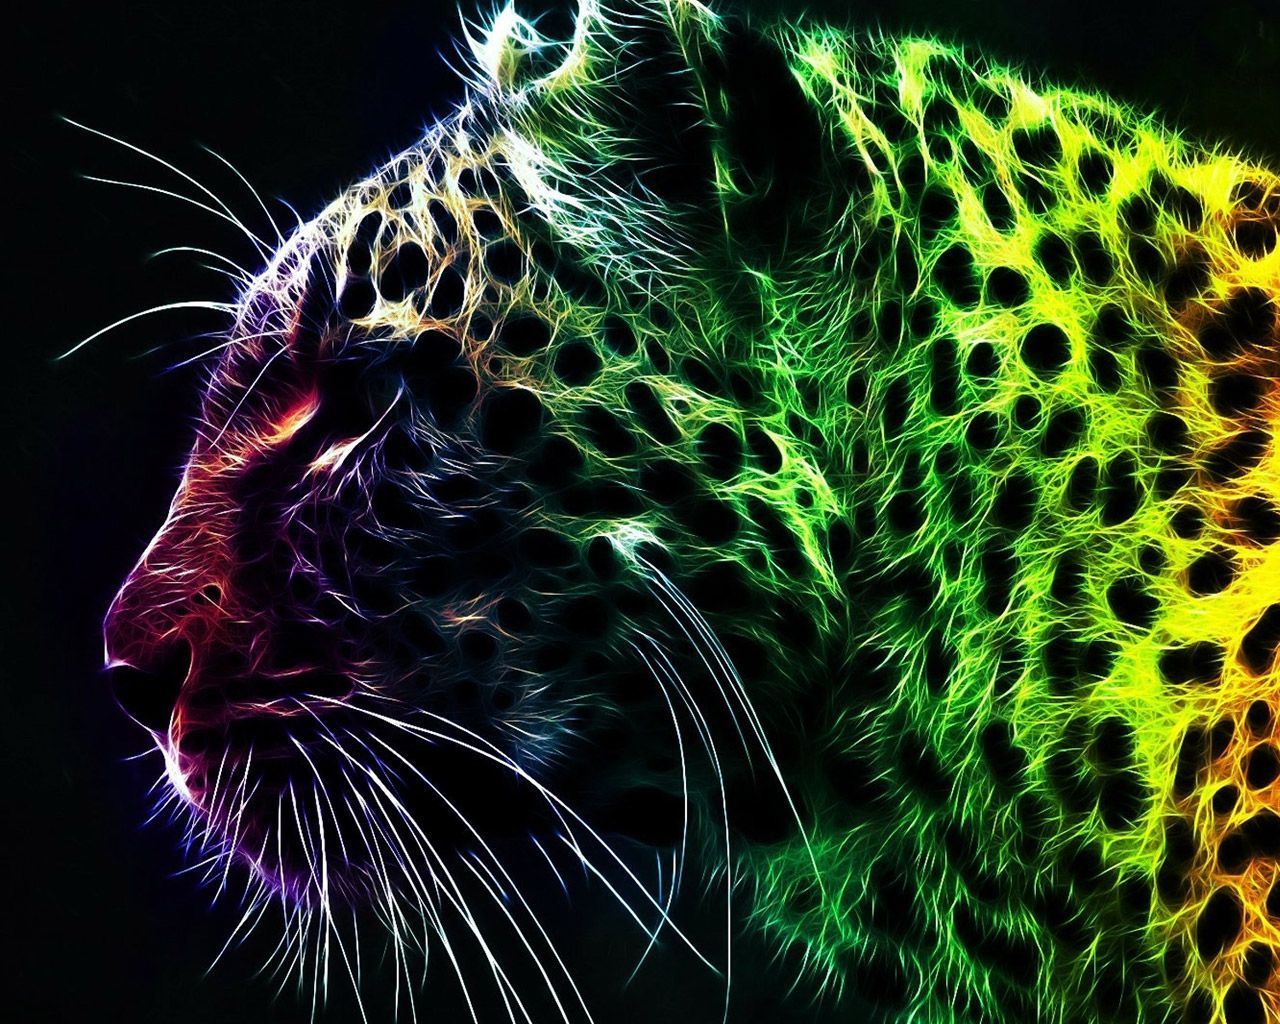 Awesome cheetah 3D Free HD Wallpapers for Desktop | Get Latest ...